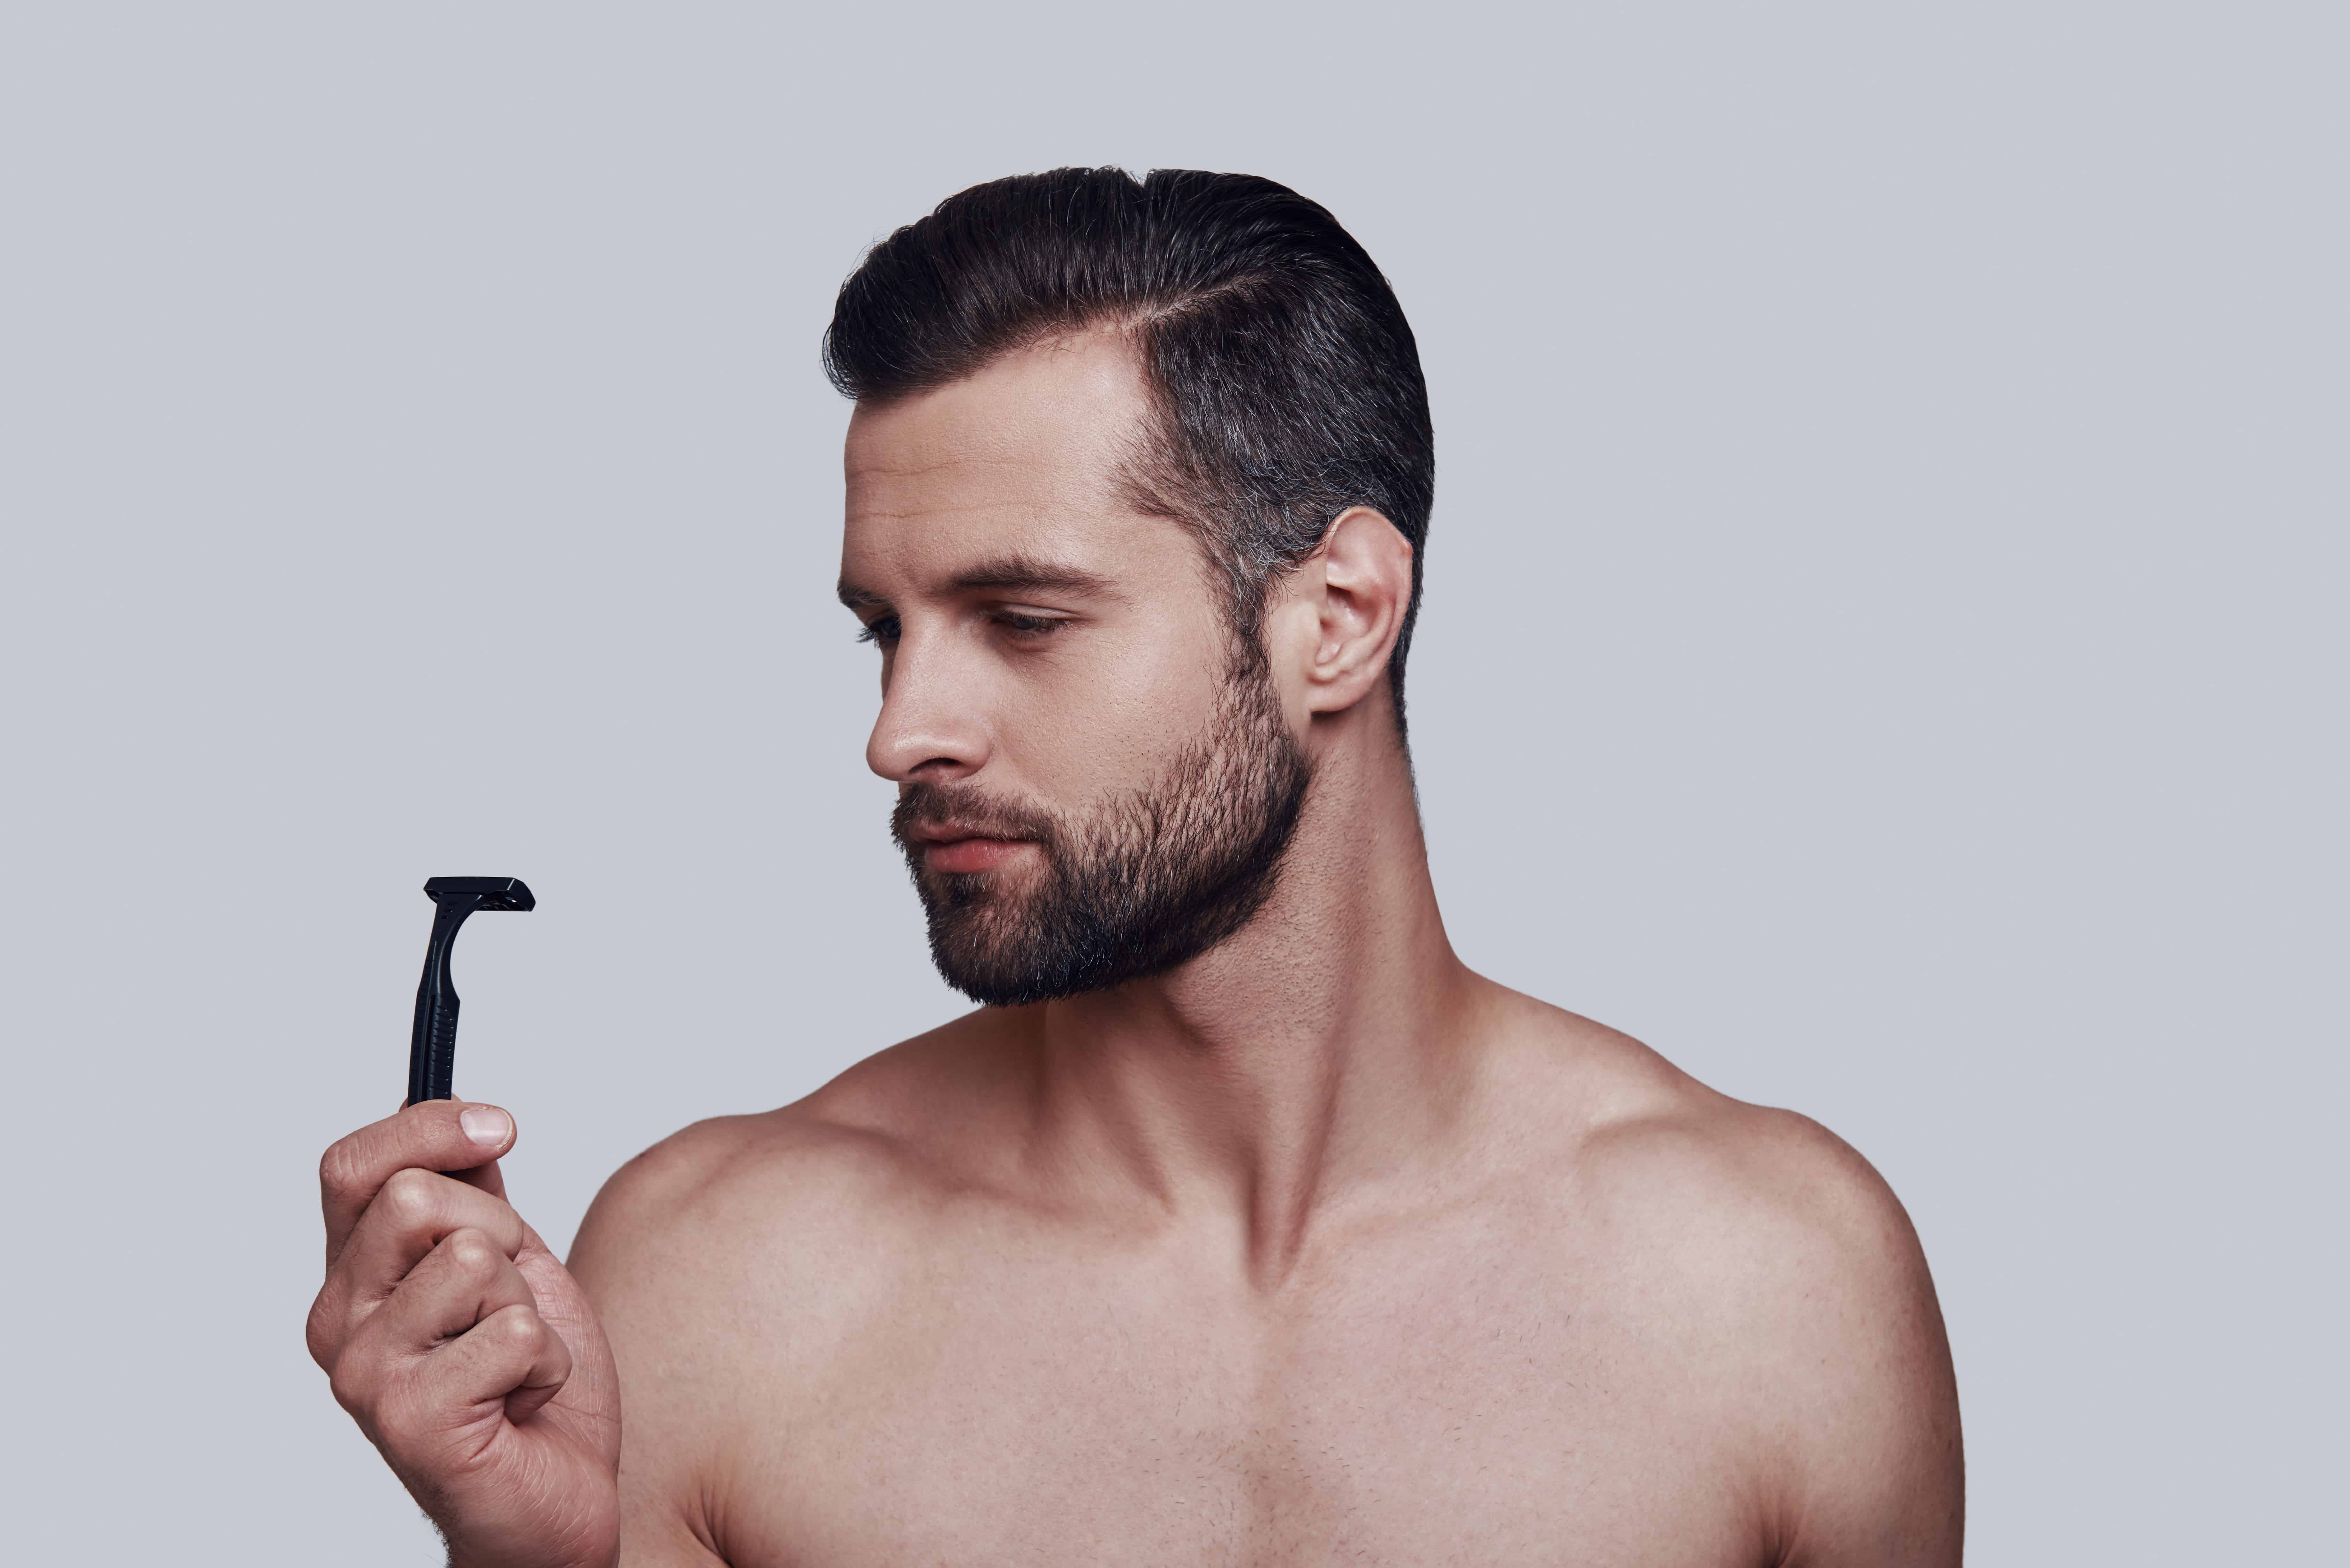 Do you over shave without shaving cream?